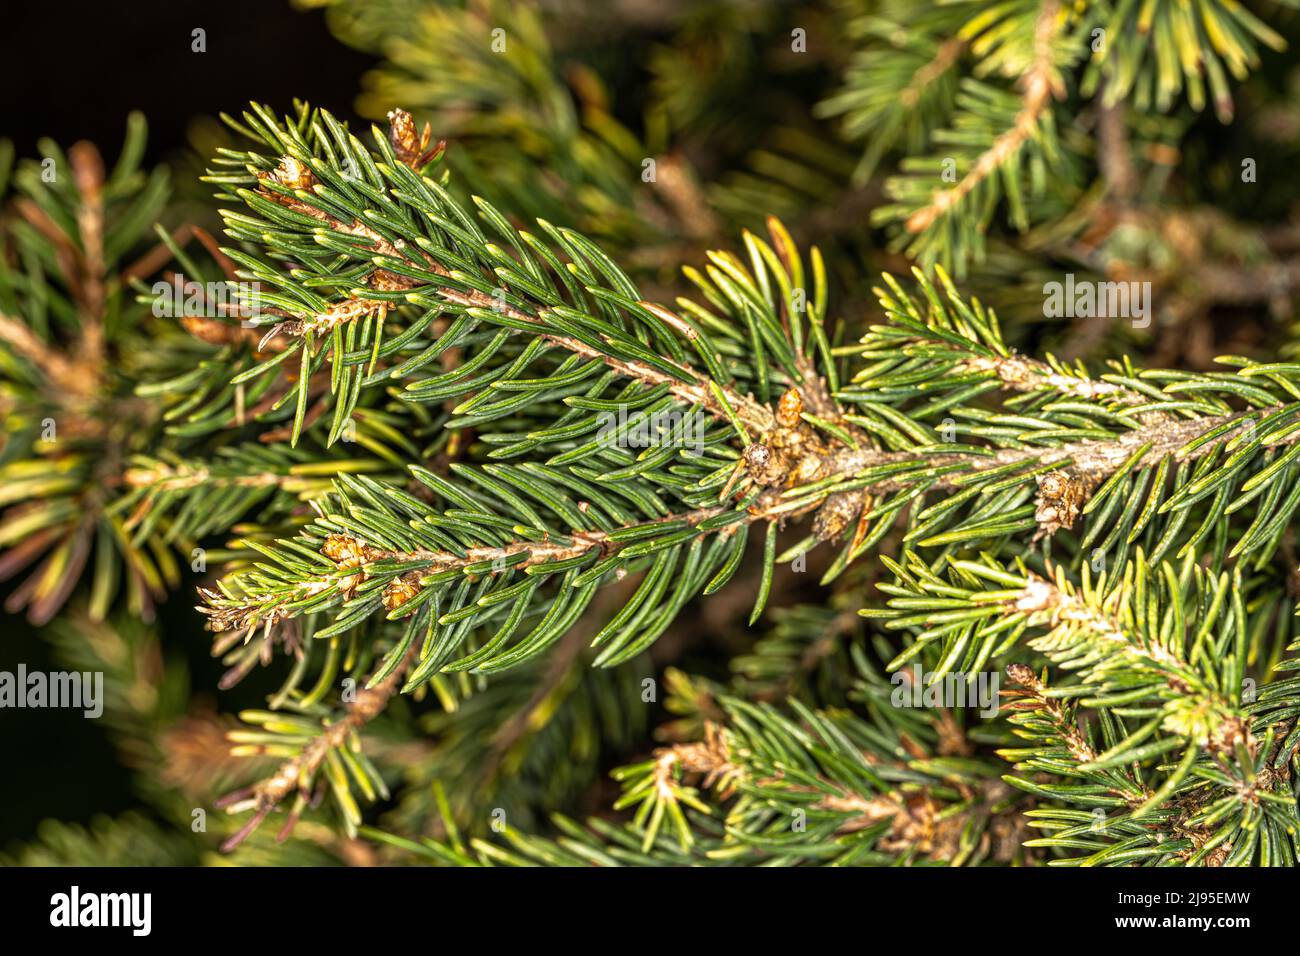 Leaves of Norway Spruce 'Hillside Upright' (Picea abies) Stock Photo